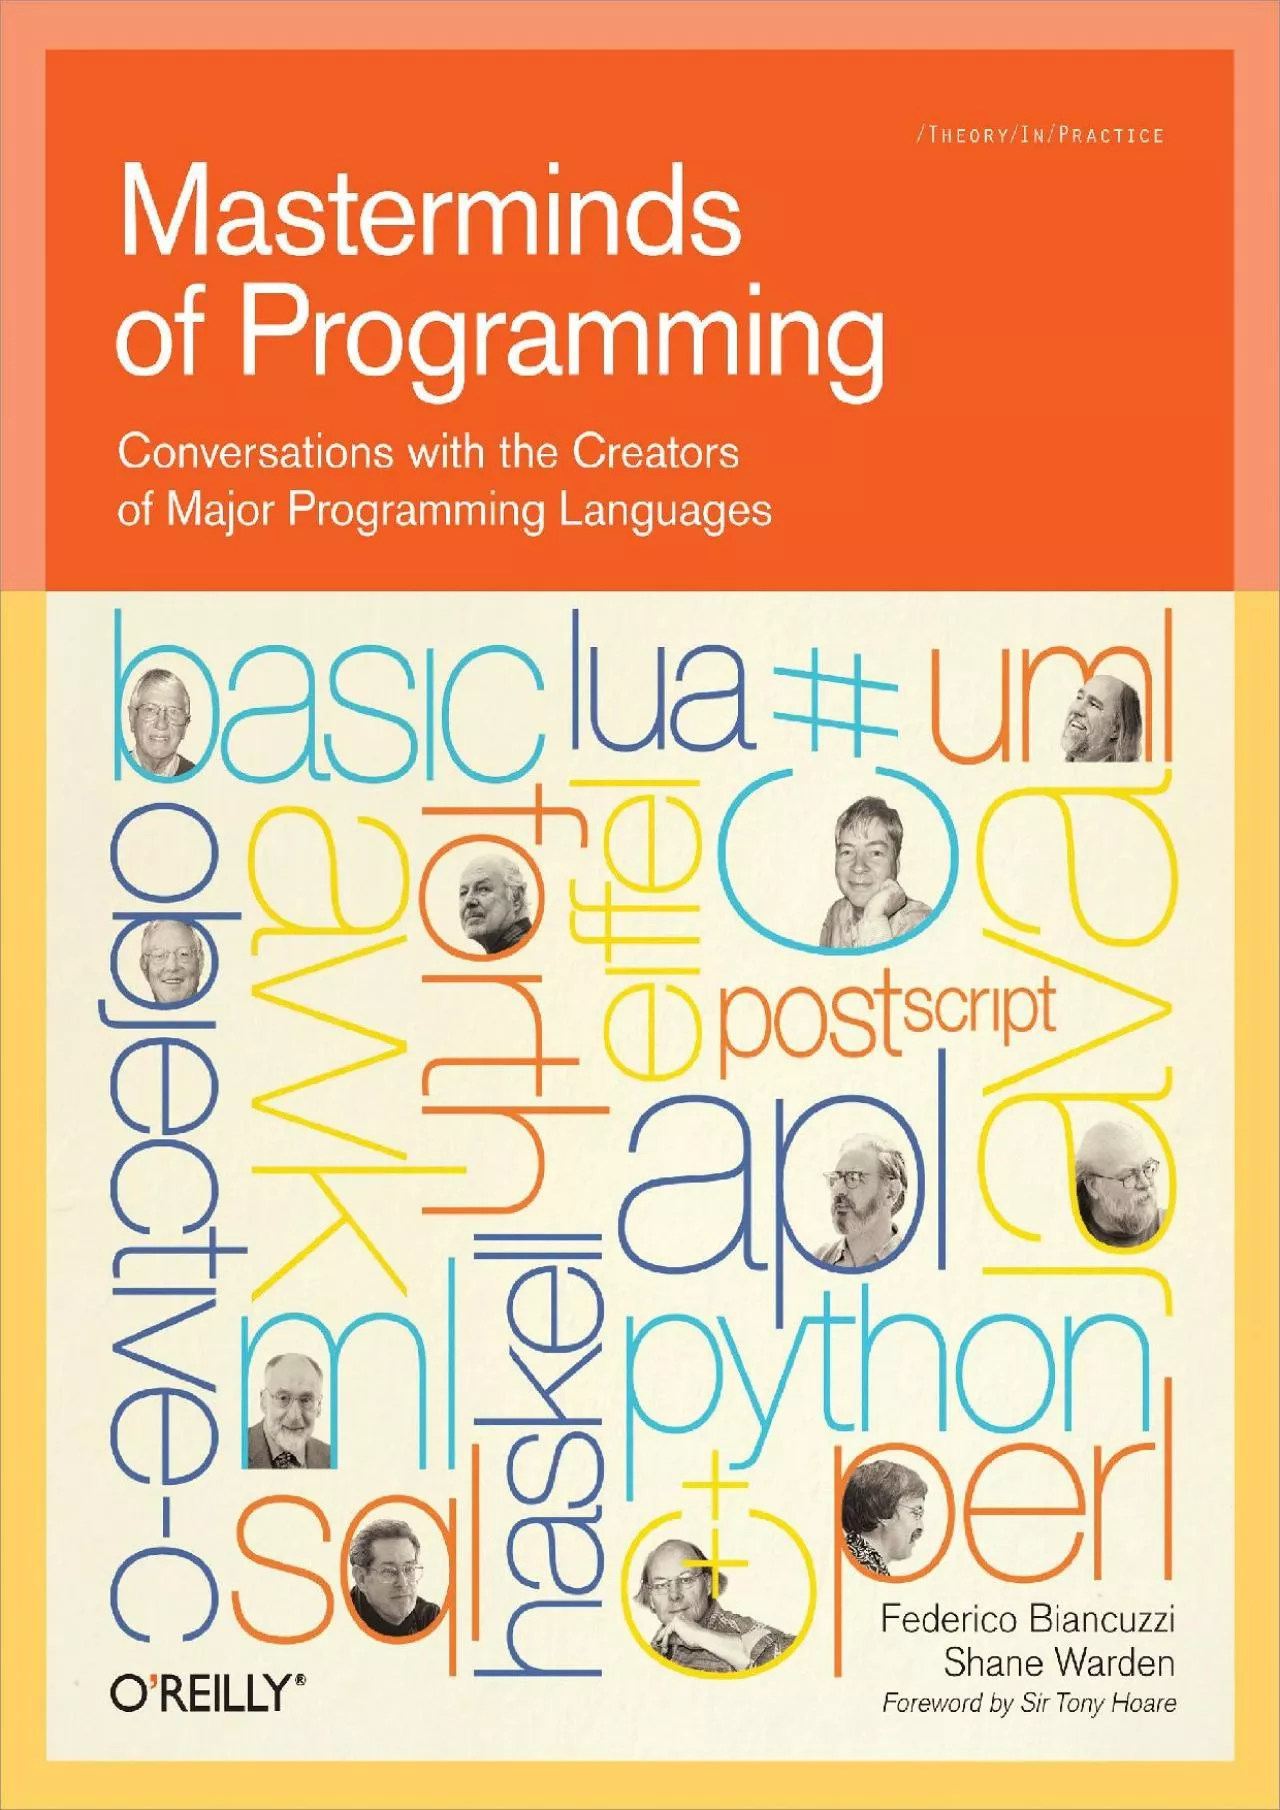 [READING BOOK]-Masterminds of Programming: Conversations with the Creators of Major Programming